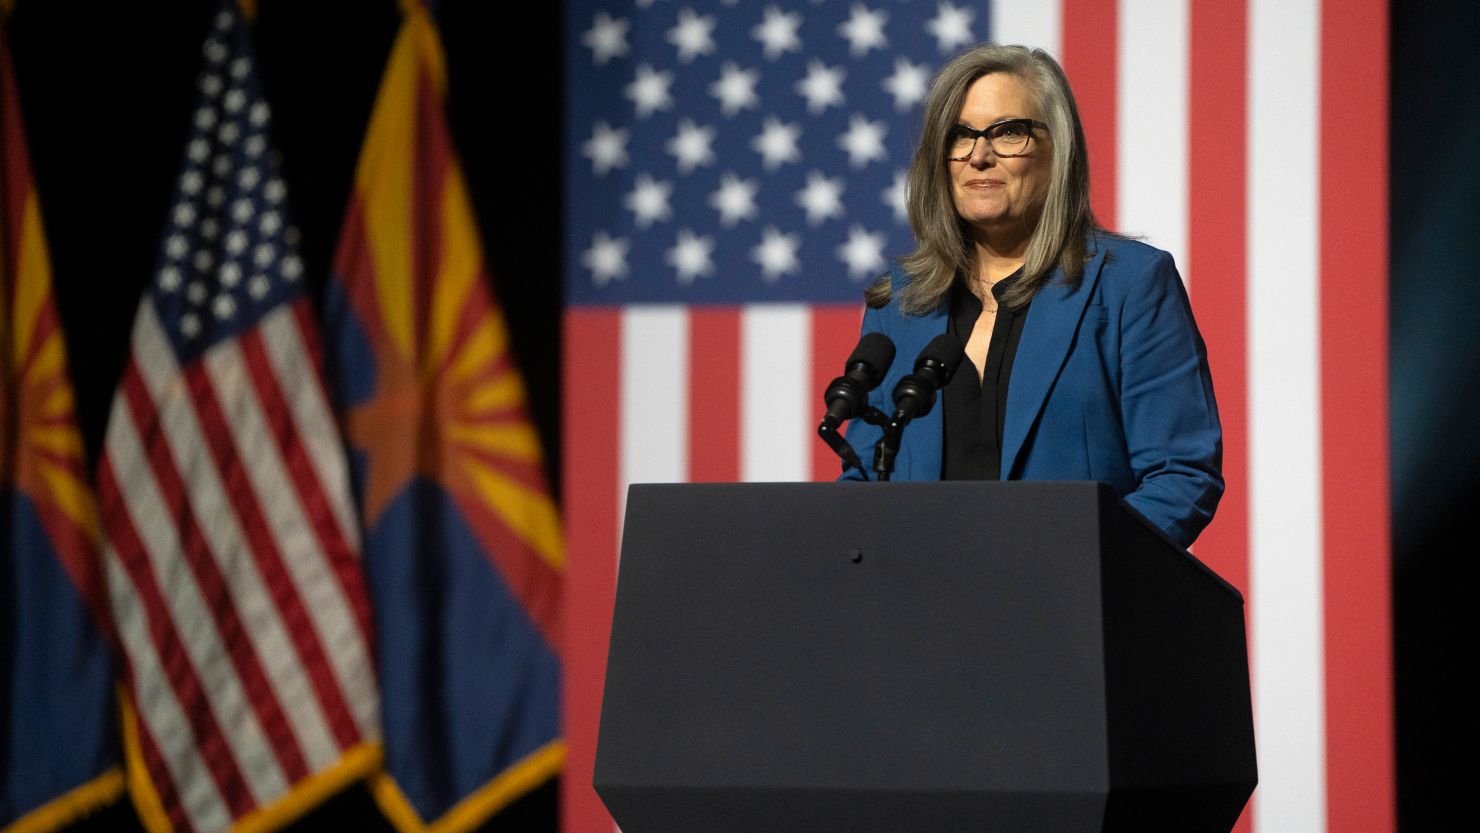 Arizona Gov. Katie Hobbs gives a brief speech prior to President Joe Biden's remarks at the Tempe Center for the Arts on September 28, 2023, in Tempe, Arizona.